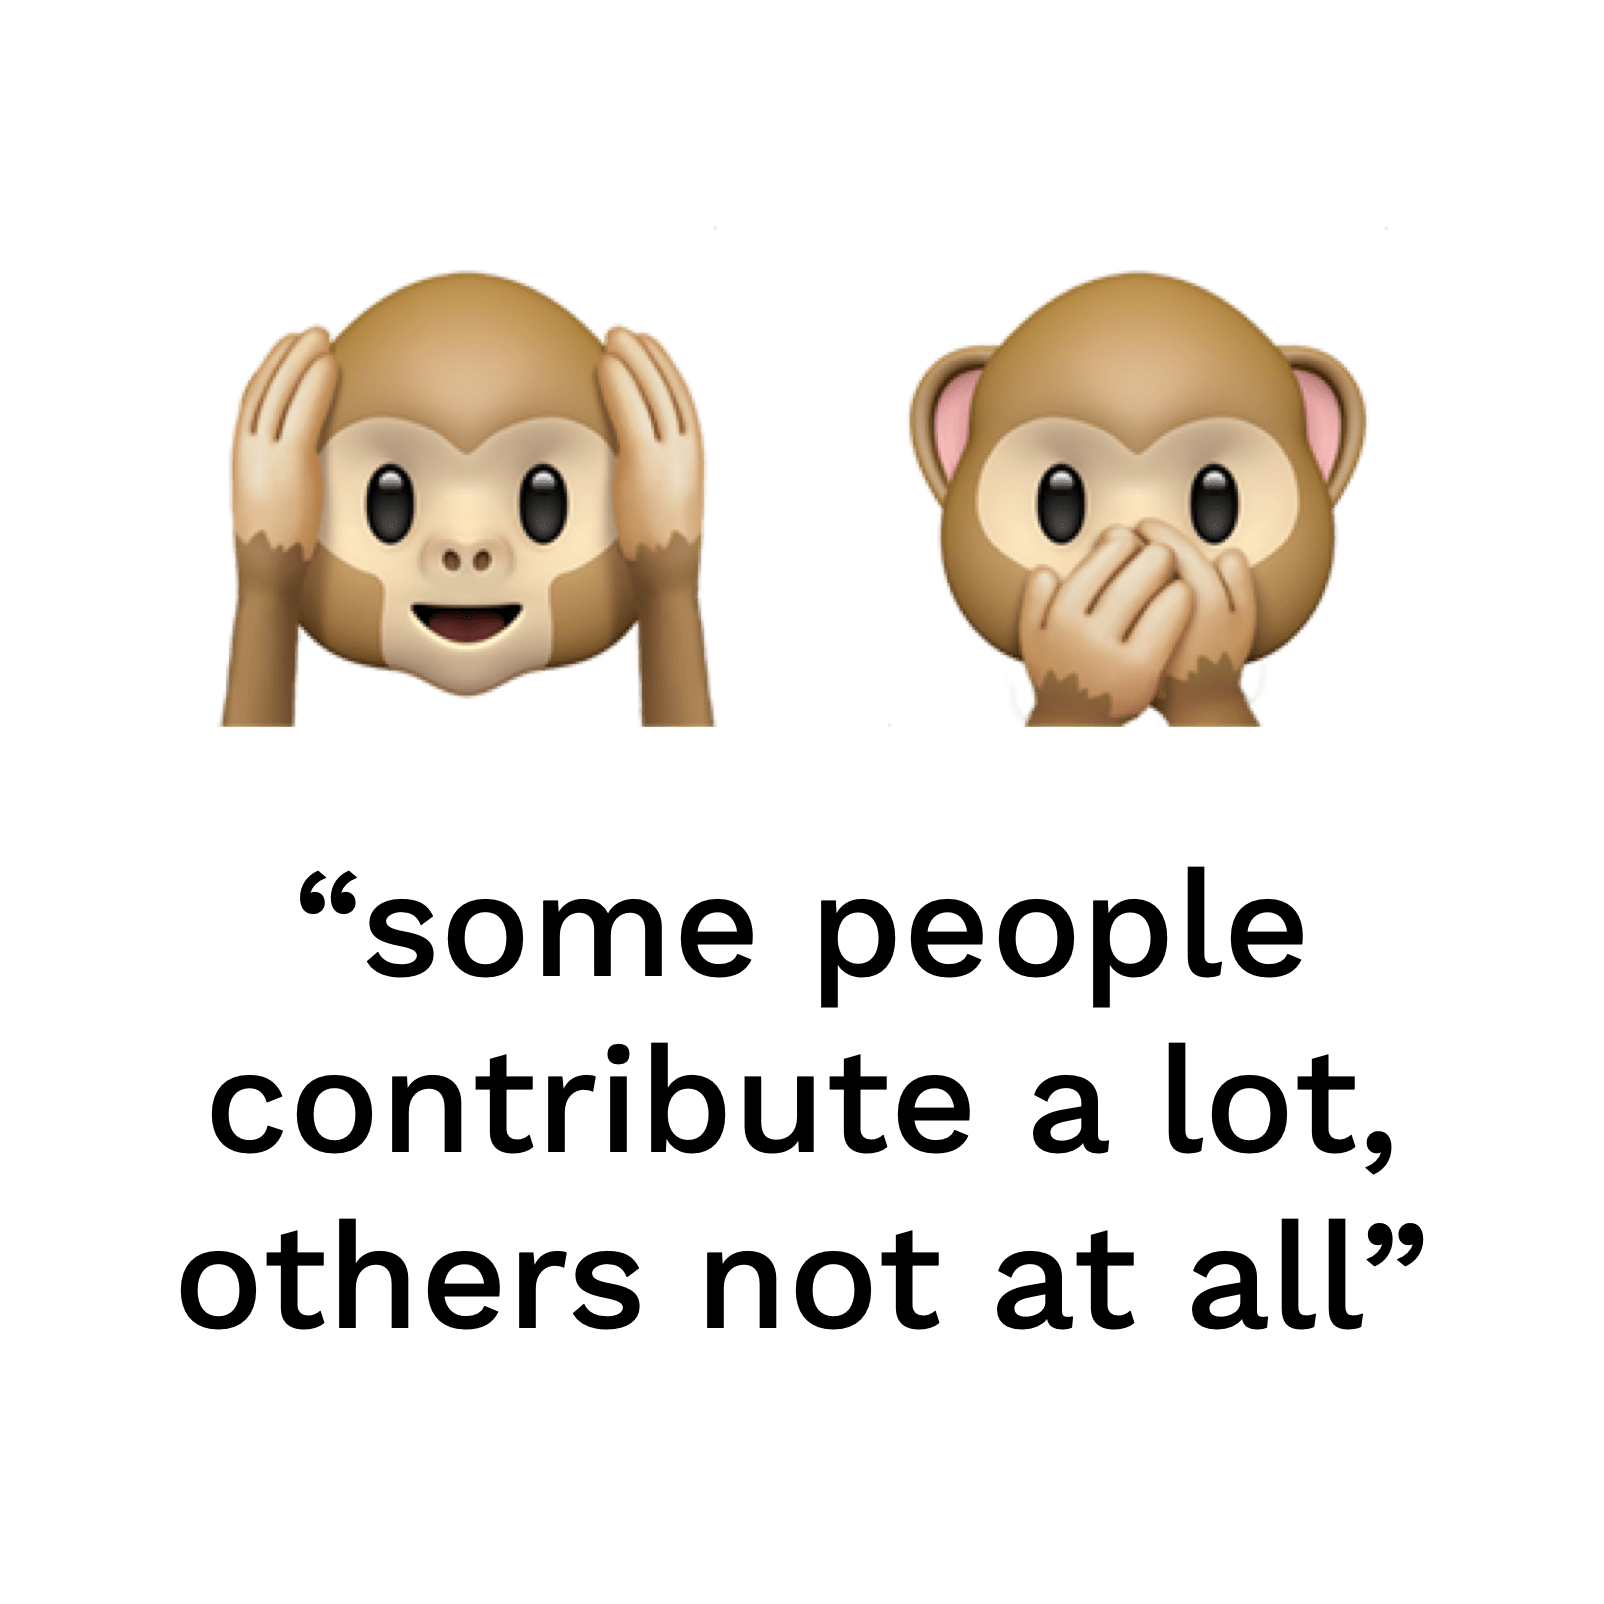 "some people contribute a lot, some not at all"